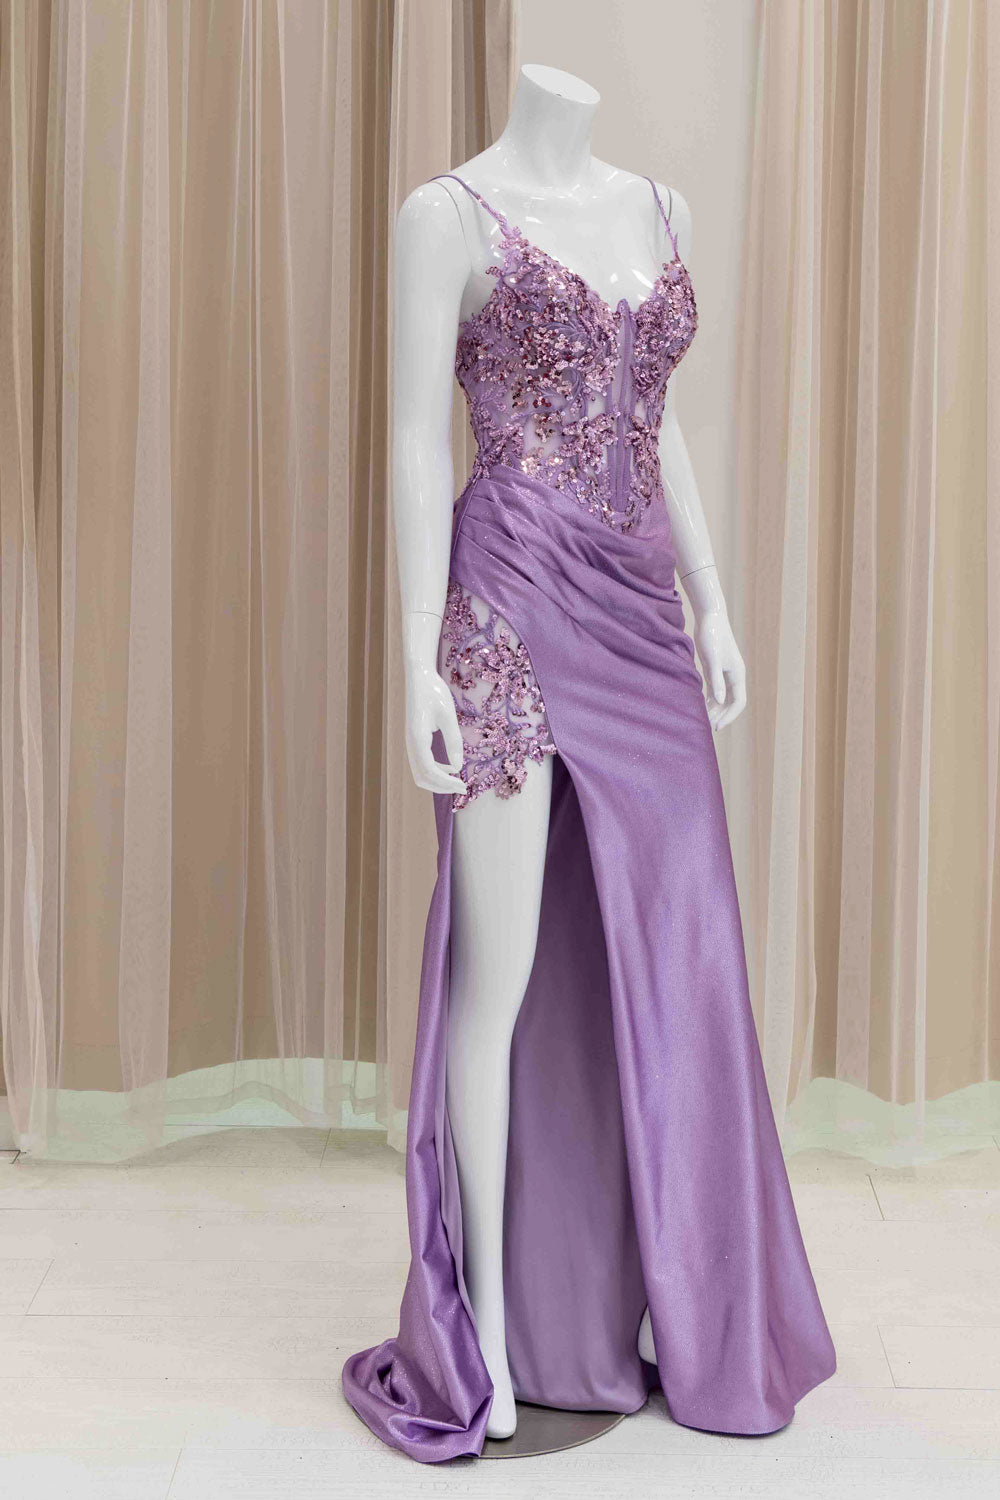 Sexy Wedding Guest Dress in Lavender